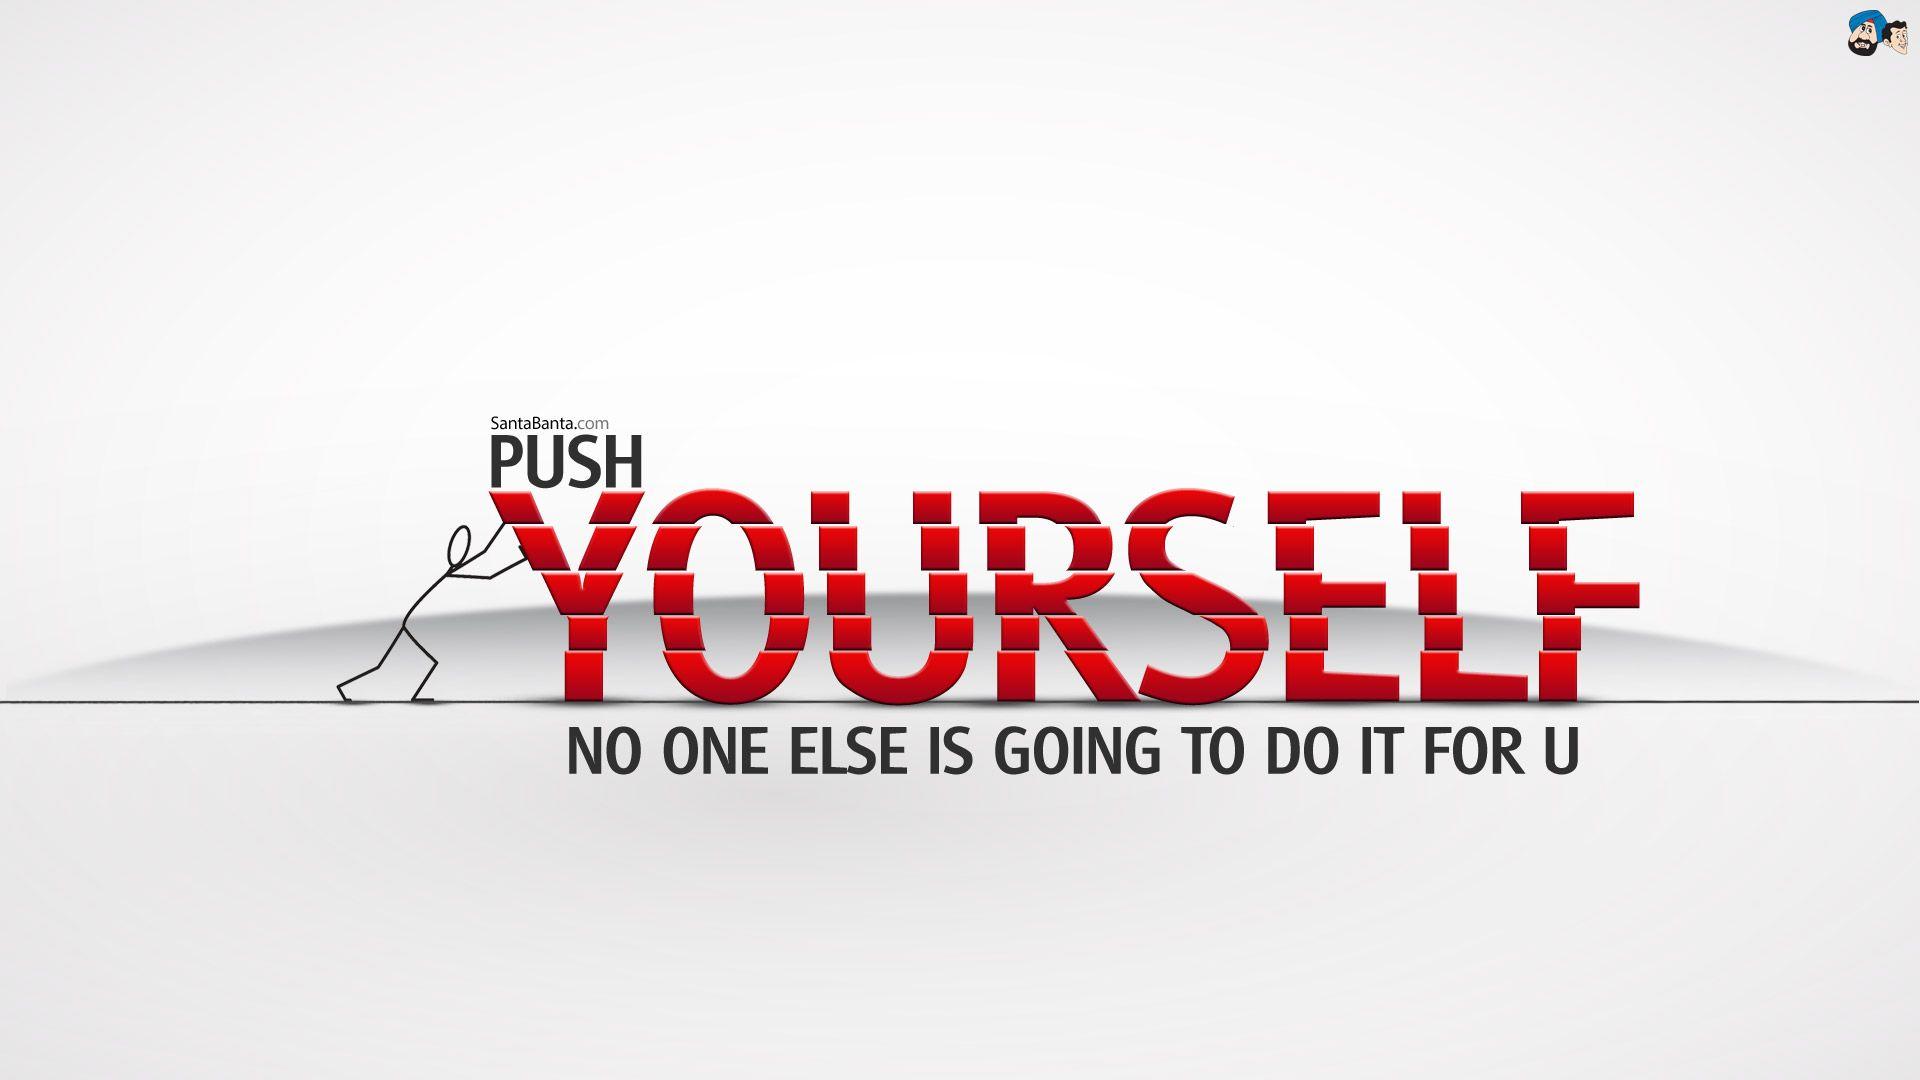 Motivation wallpapers hd, desktop backgrounds, images and pictures